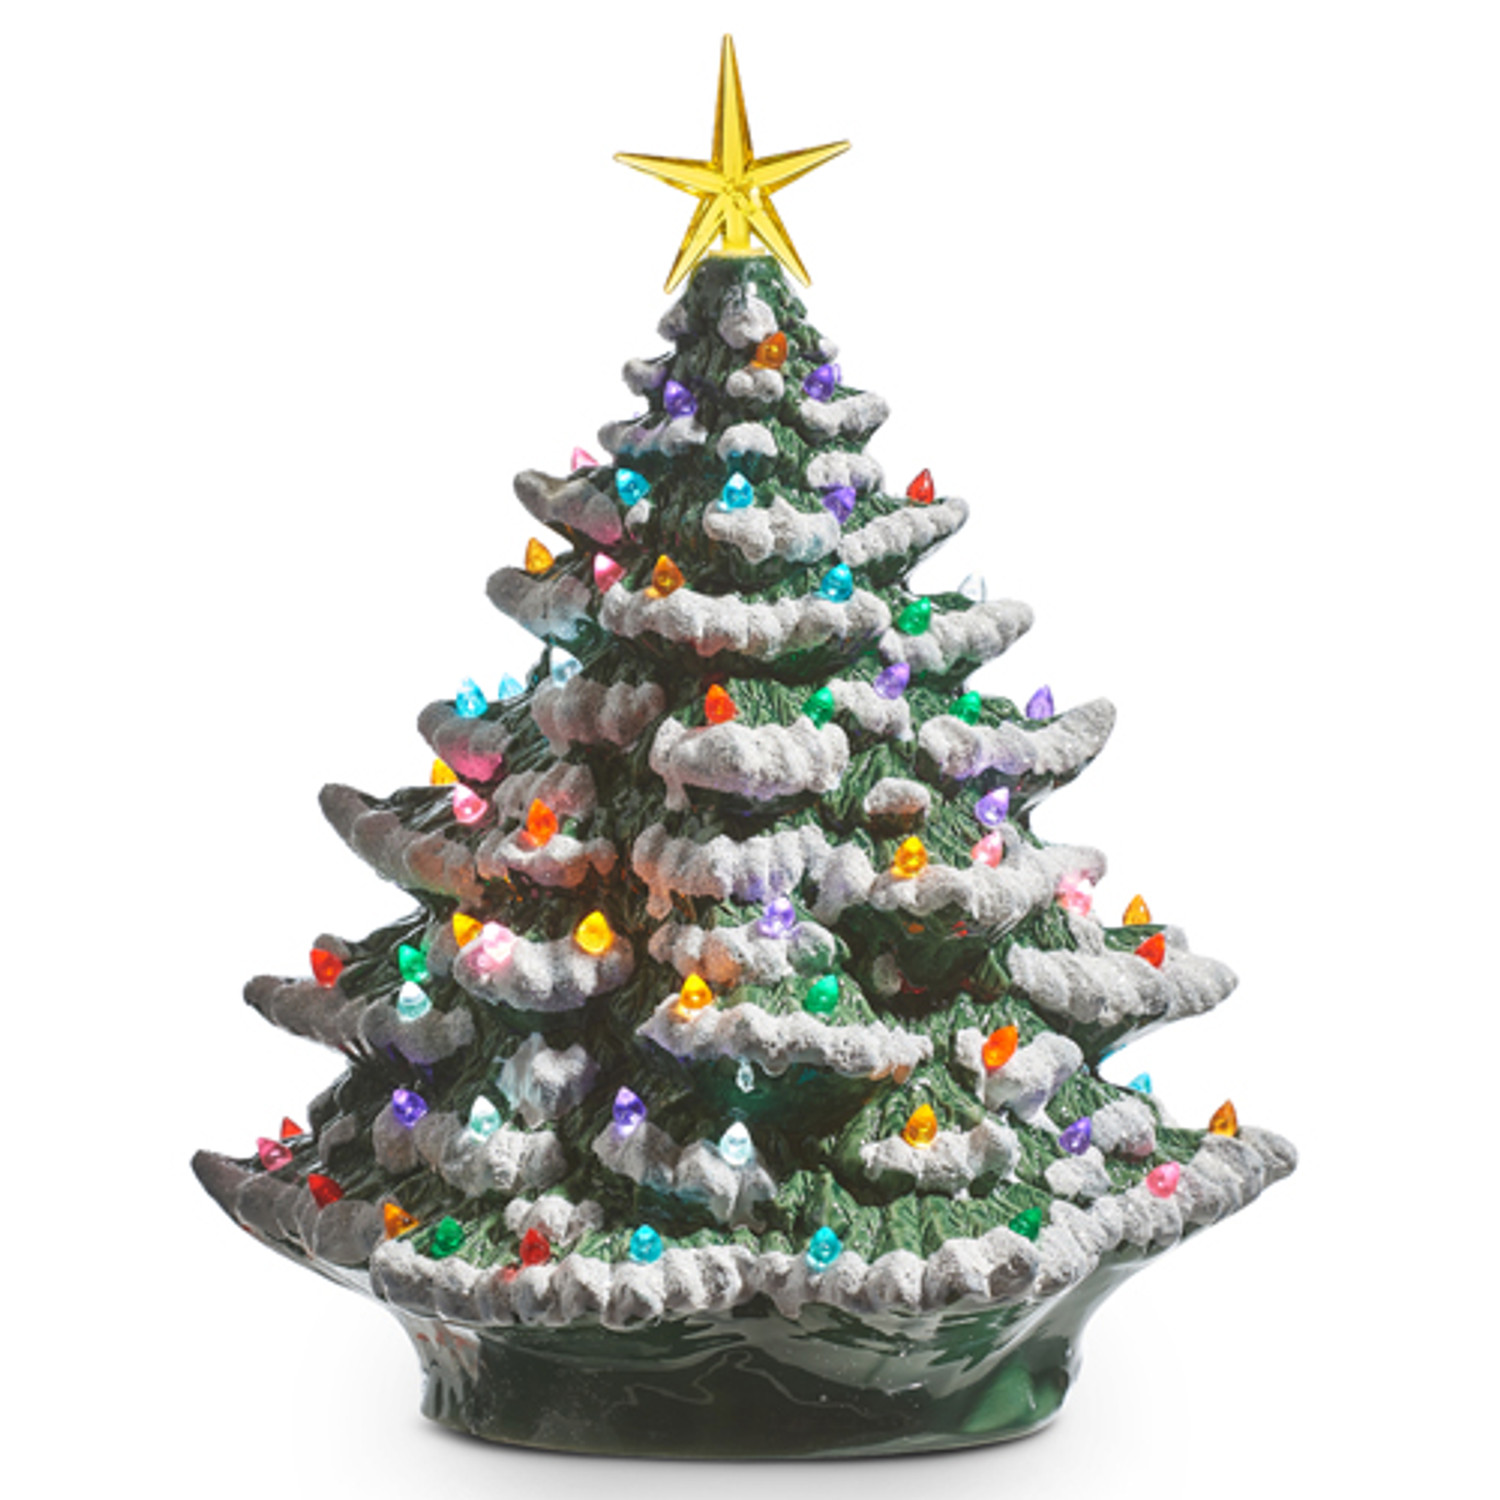 Raz Imports 13 with Timer Vintage White Lighted Tree (4119131)